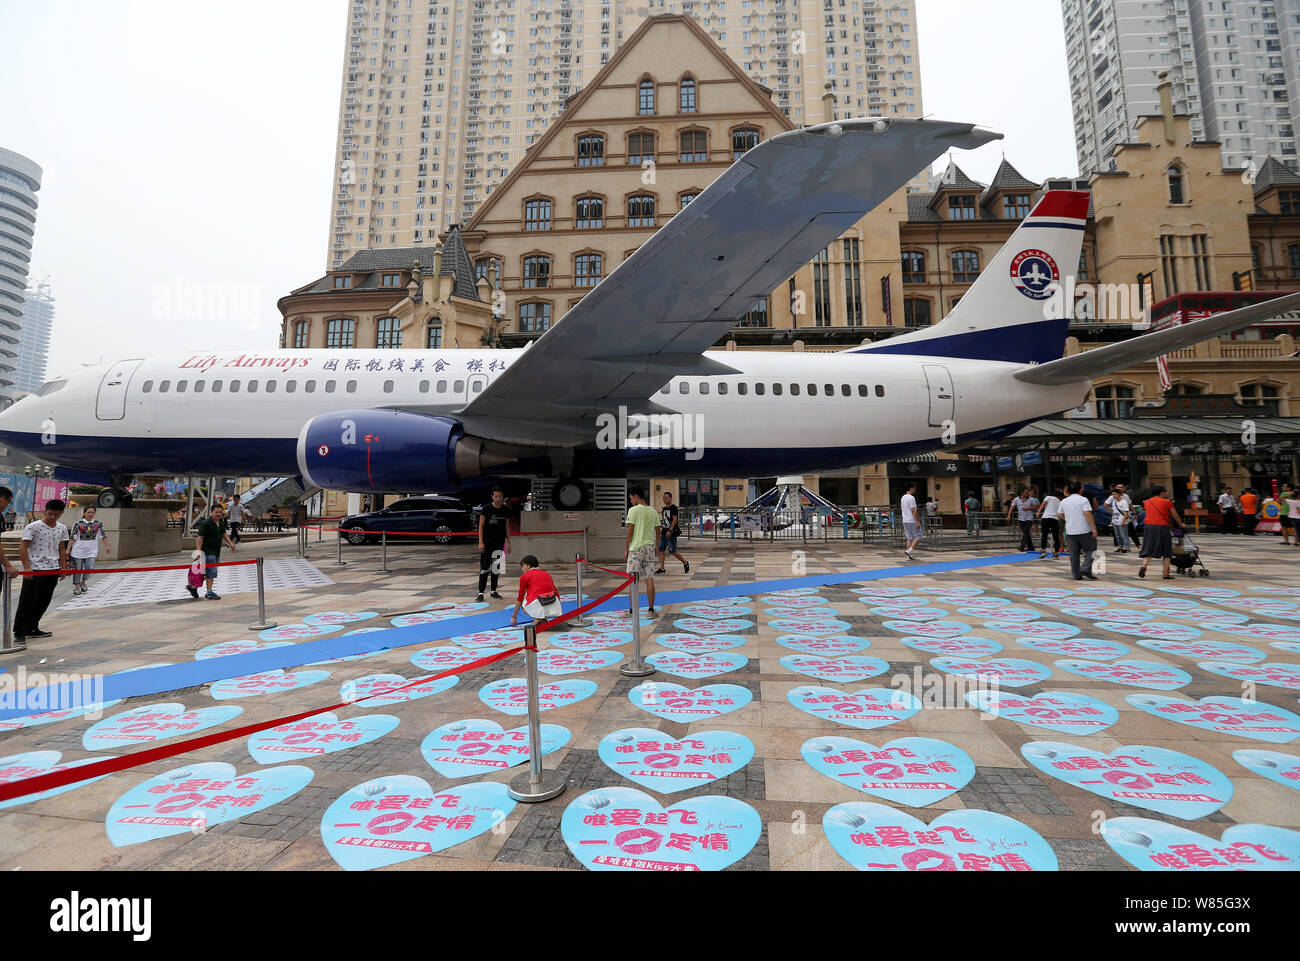 The Boeing 737-400 airplane restaurant "Lily Airways" is pictured on